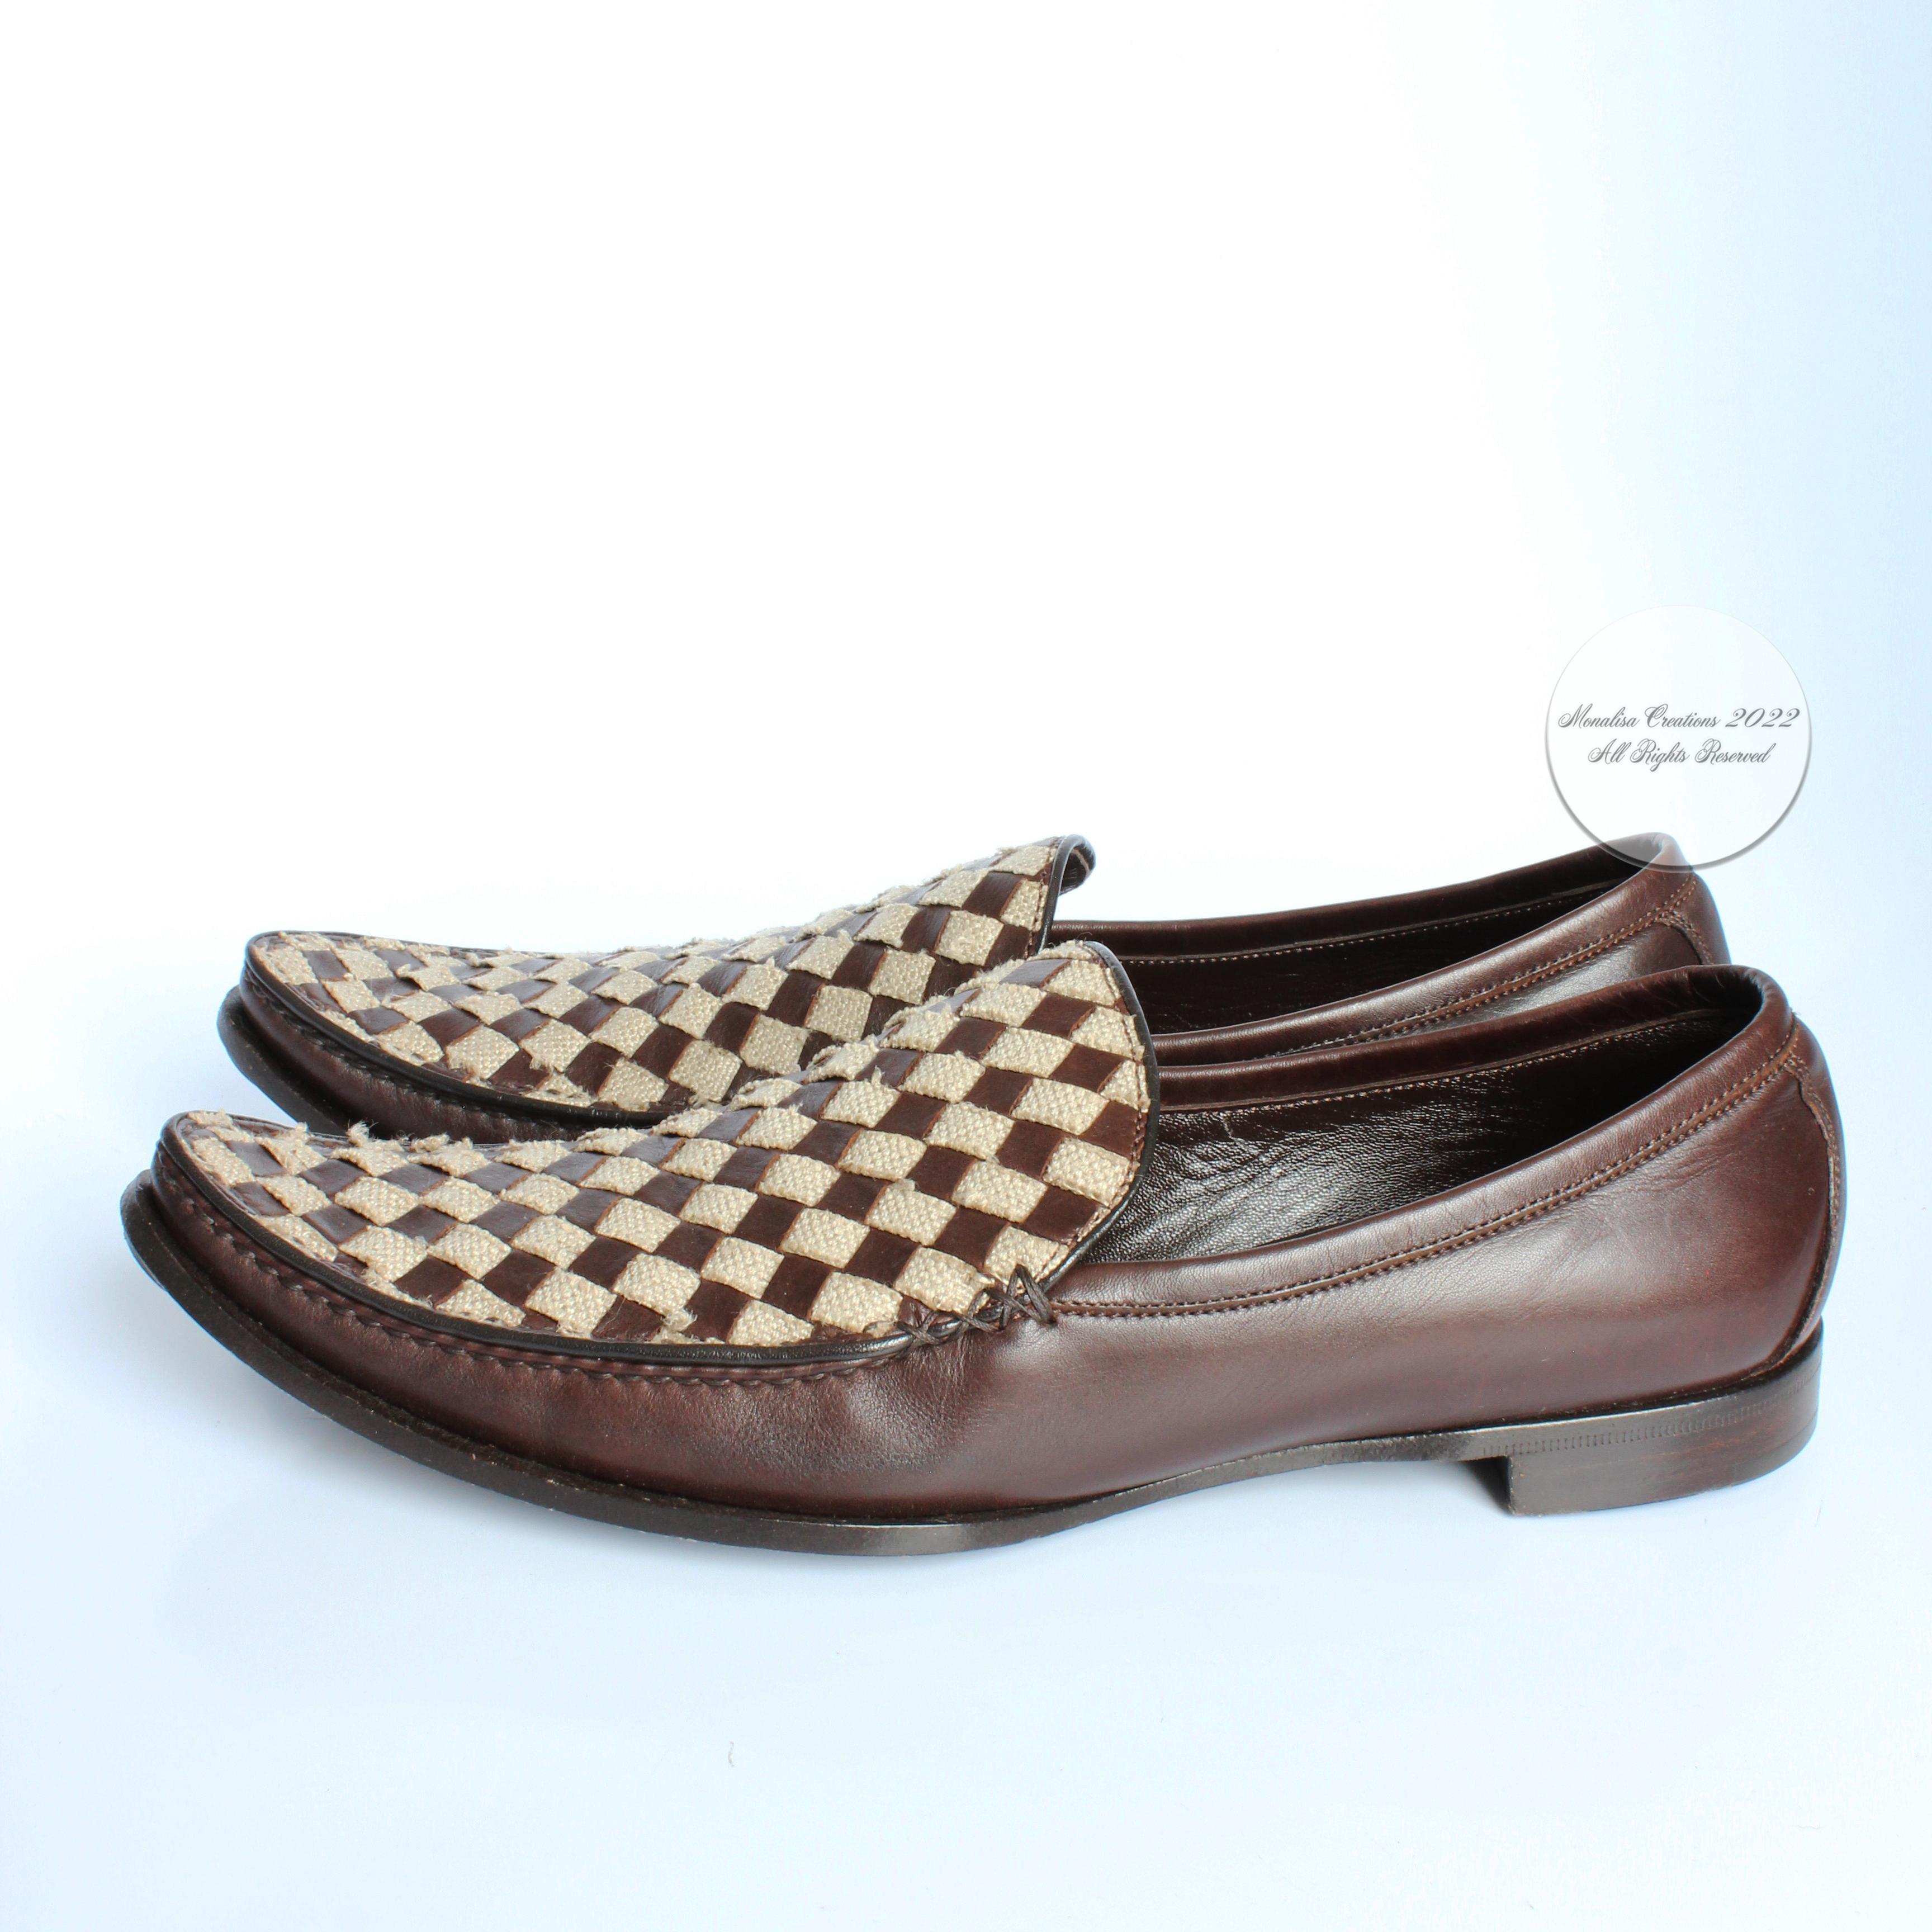 Bottega Veneta Loafers Brown Woven Leather and Canvas Flats Size 38.5  1